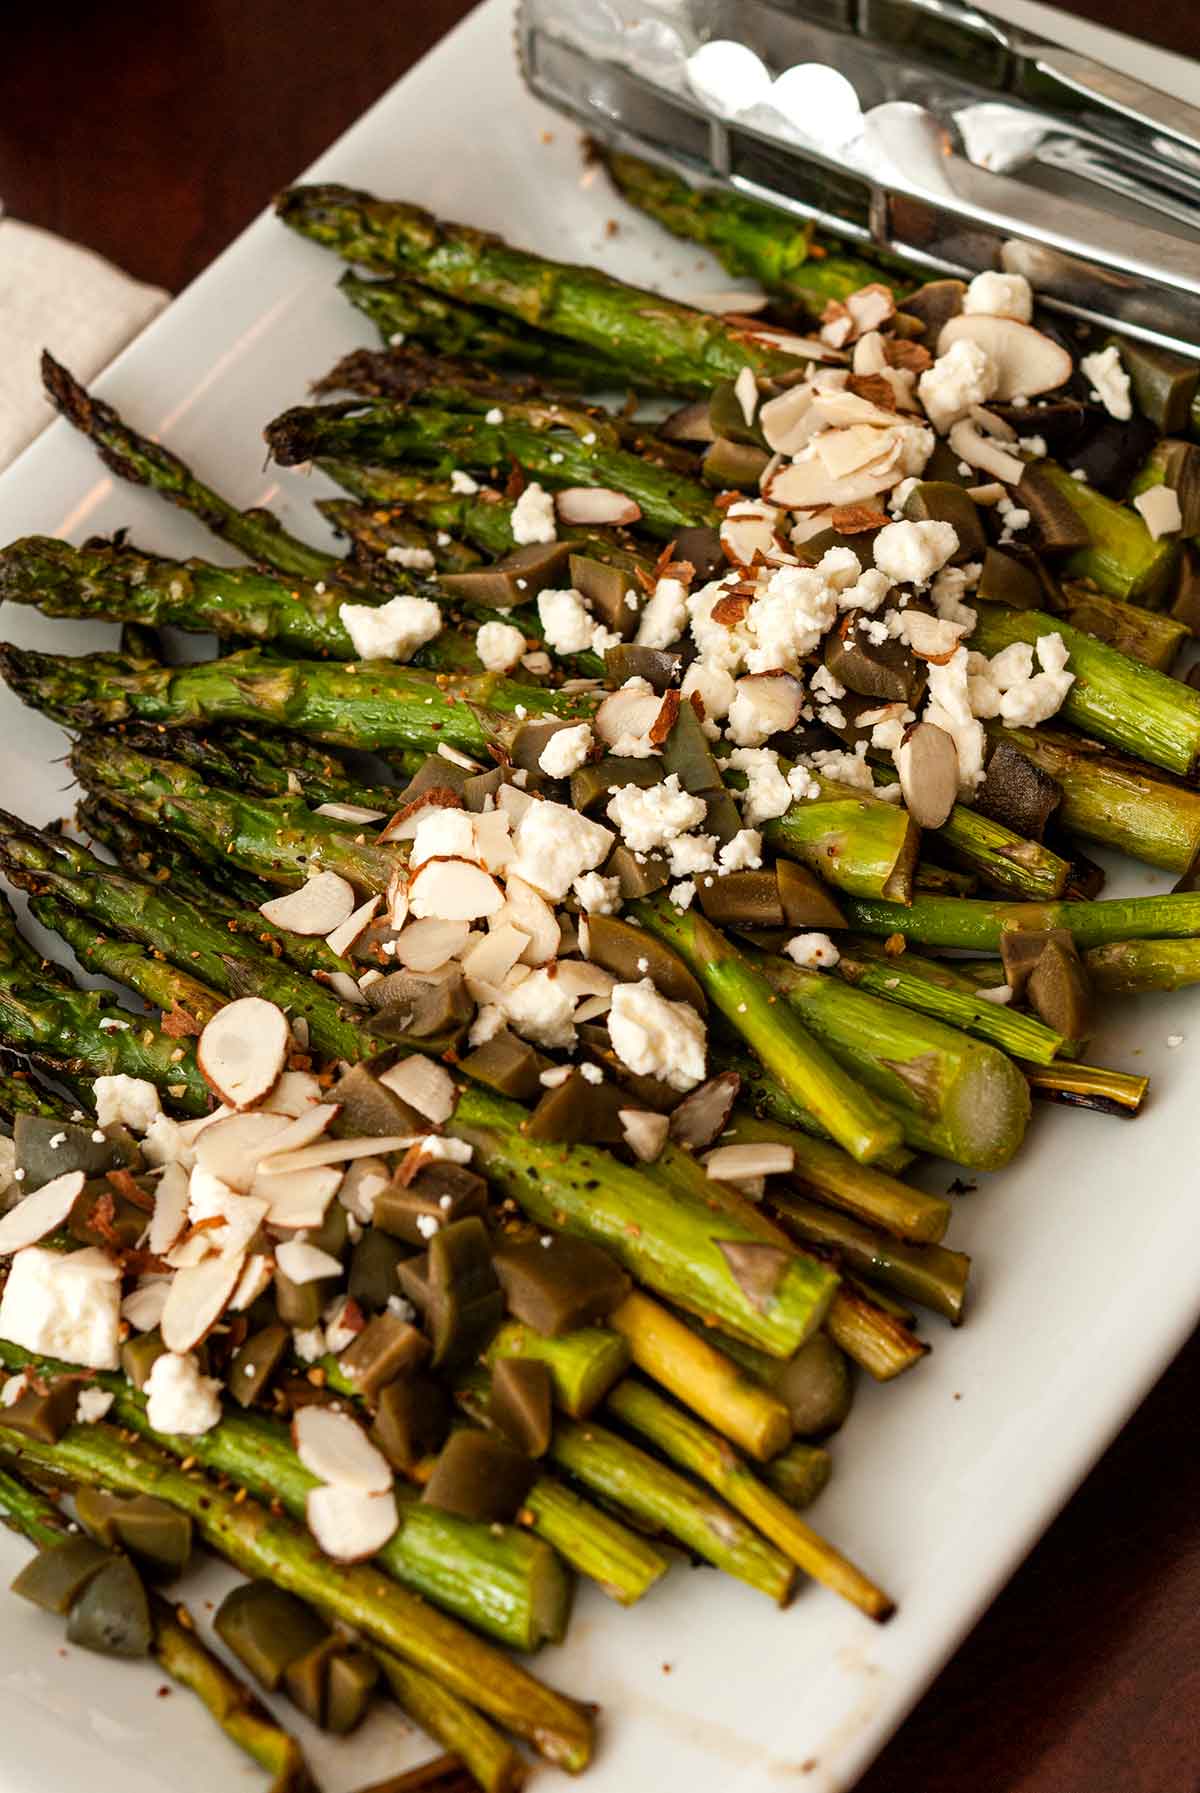 A plate of asparagus topped with feta, almonds and olives.